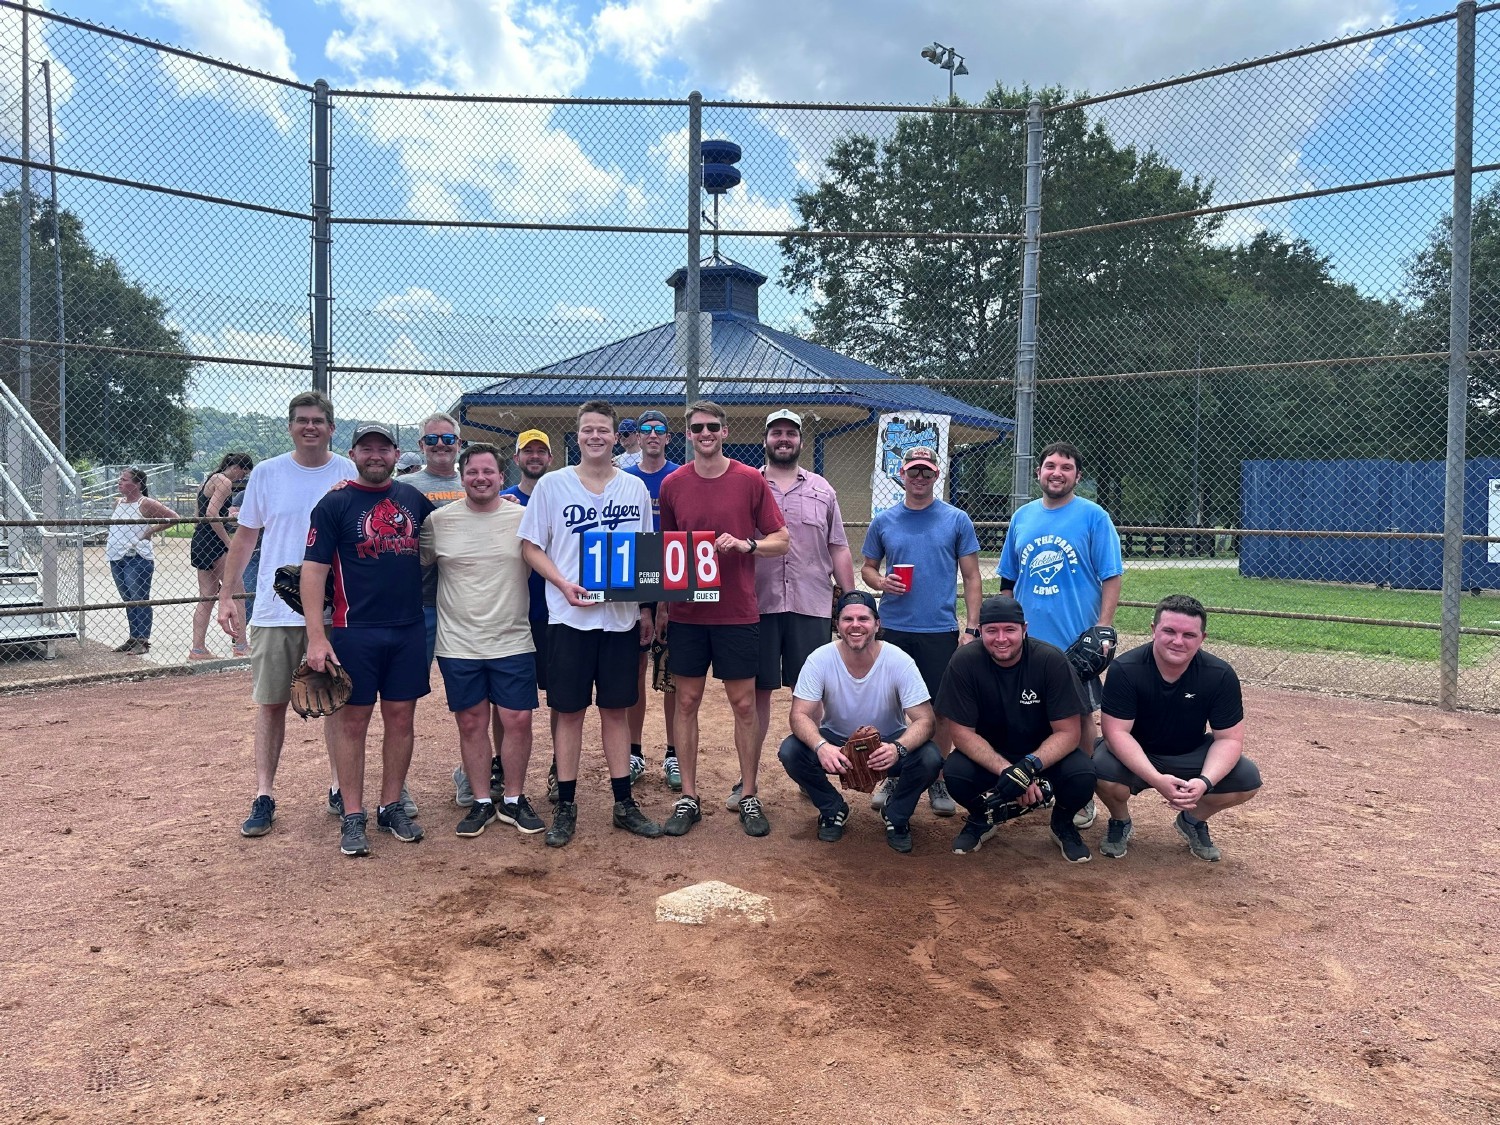 LBMC team members participate in softball, kickball, basketball, and other teambuilding activities throughout the year.